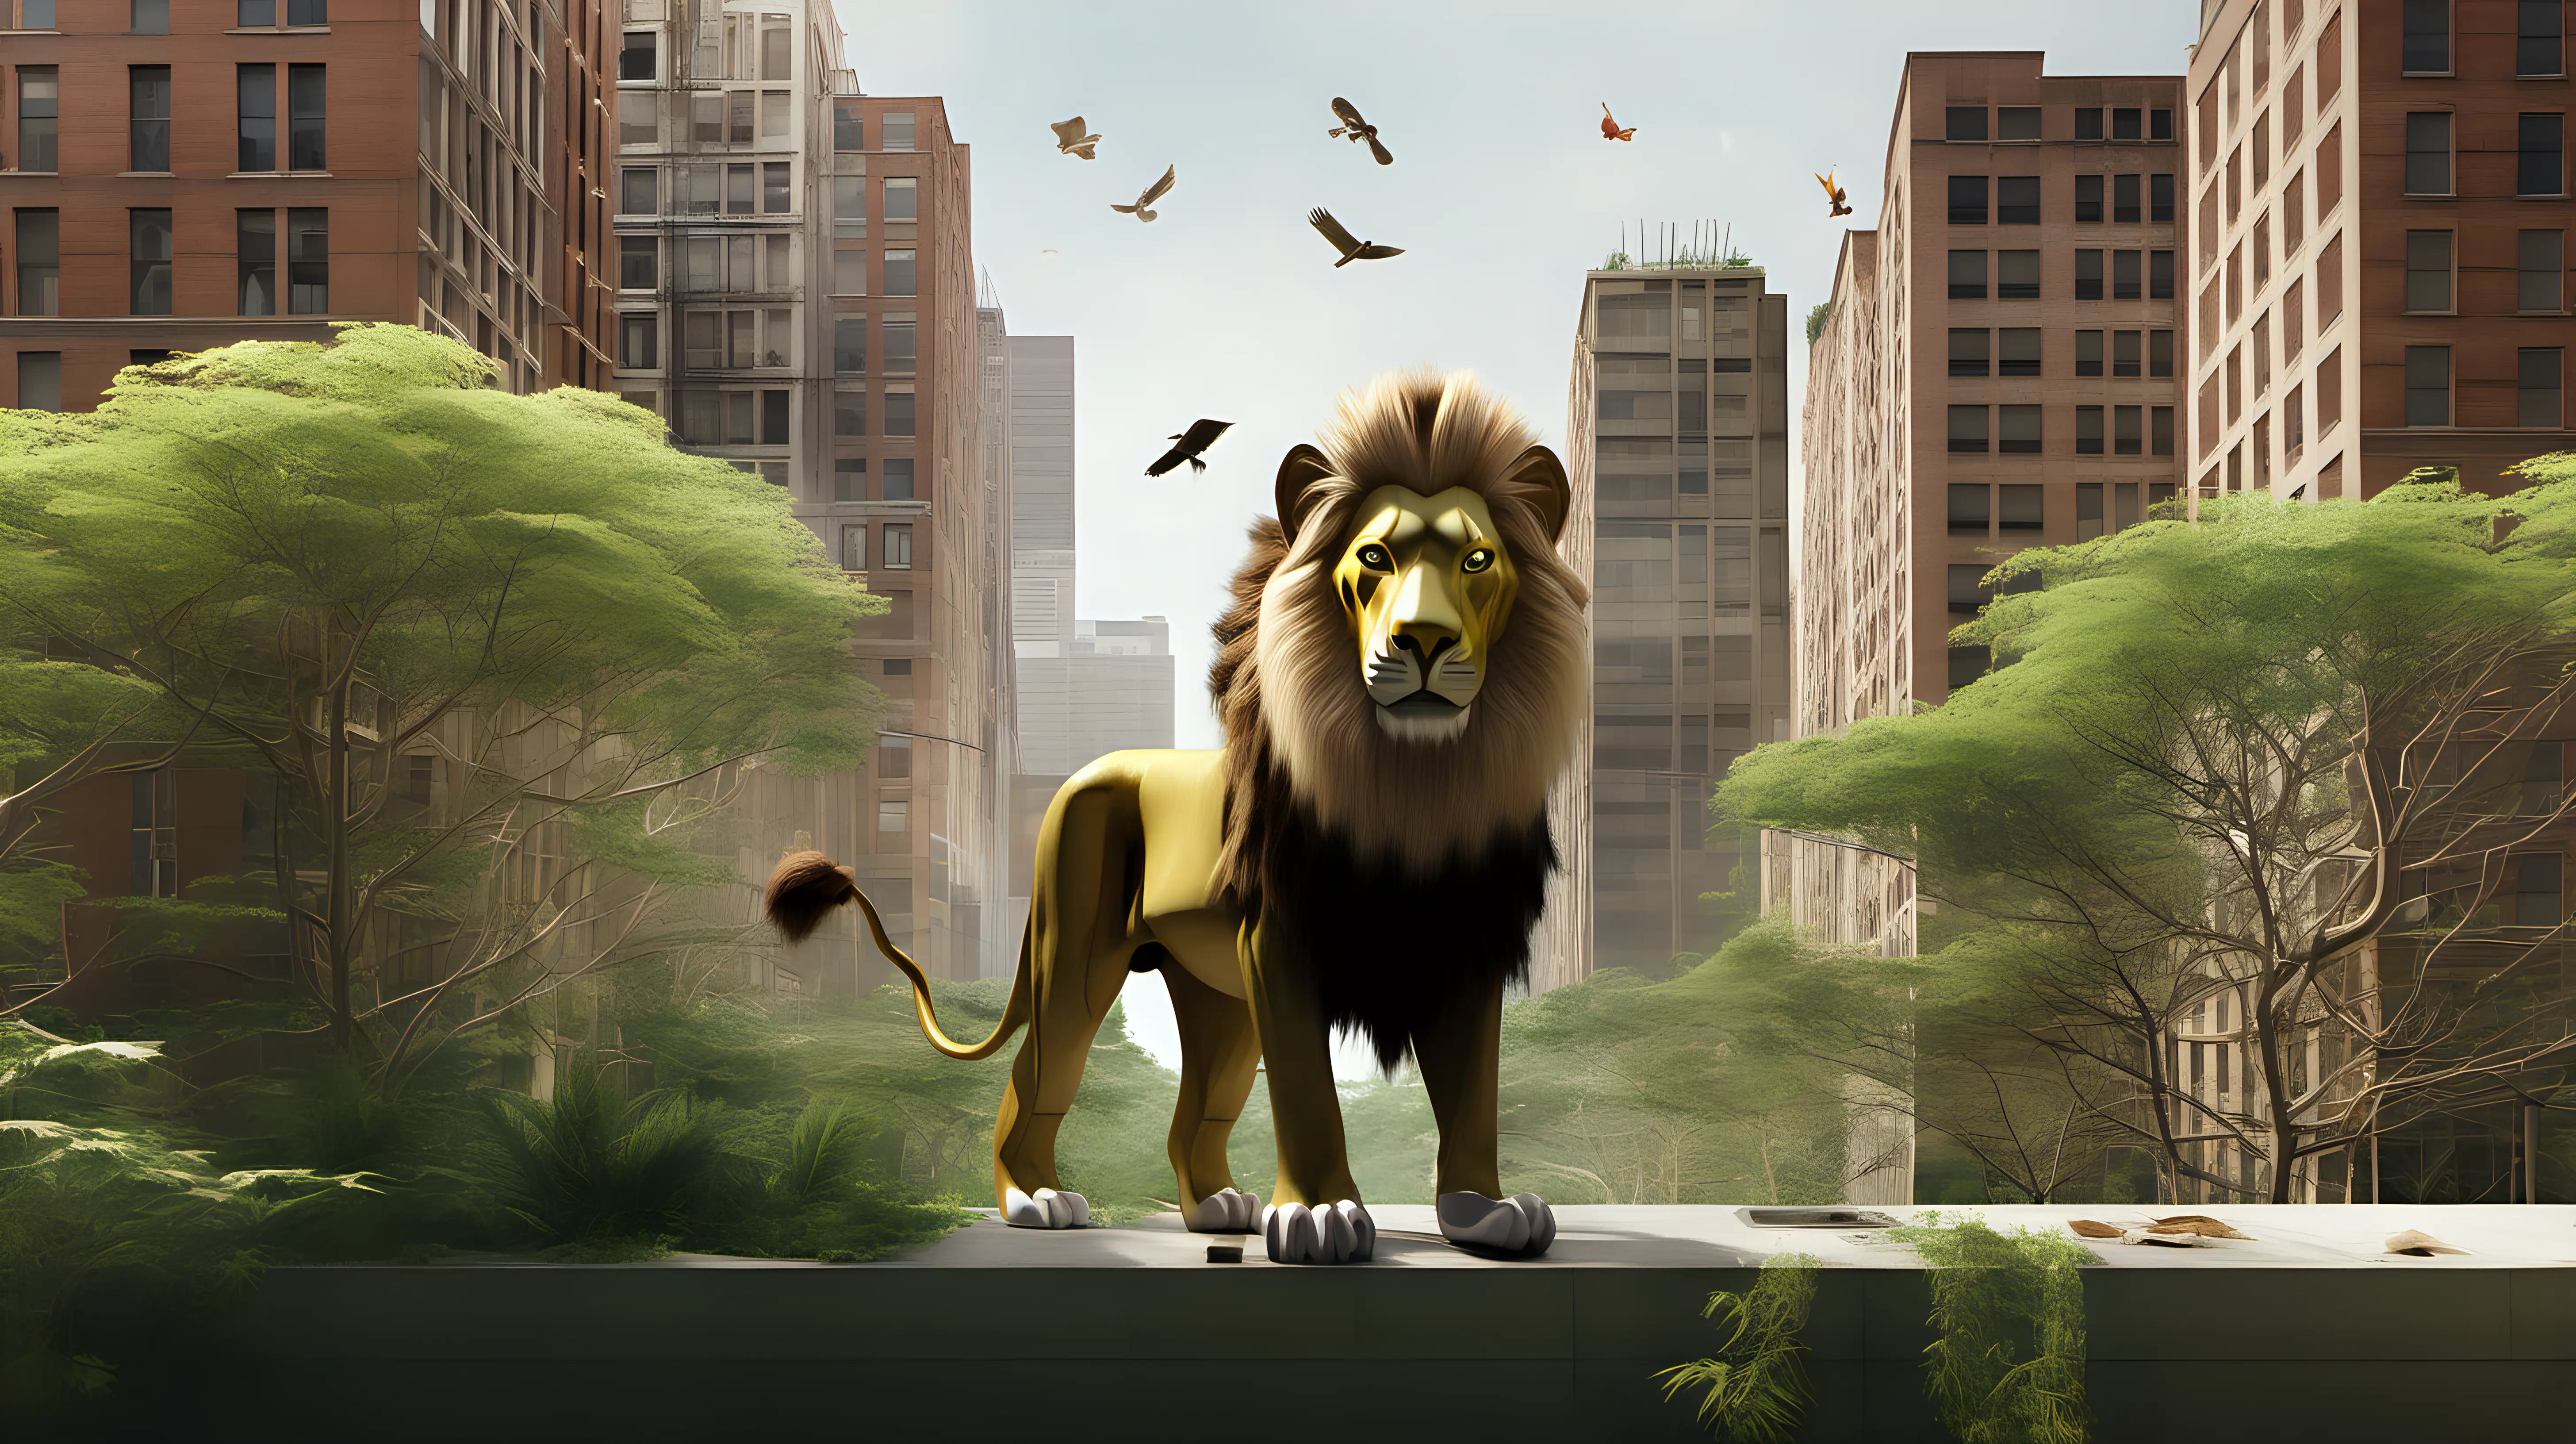 "Craft a visual narrative of a lion navigating a cityscape reclaimed by nature, showcasing the resilience of wildlife and the potential for coexistence in urban environments."